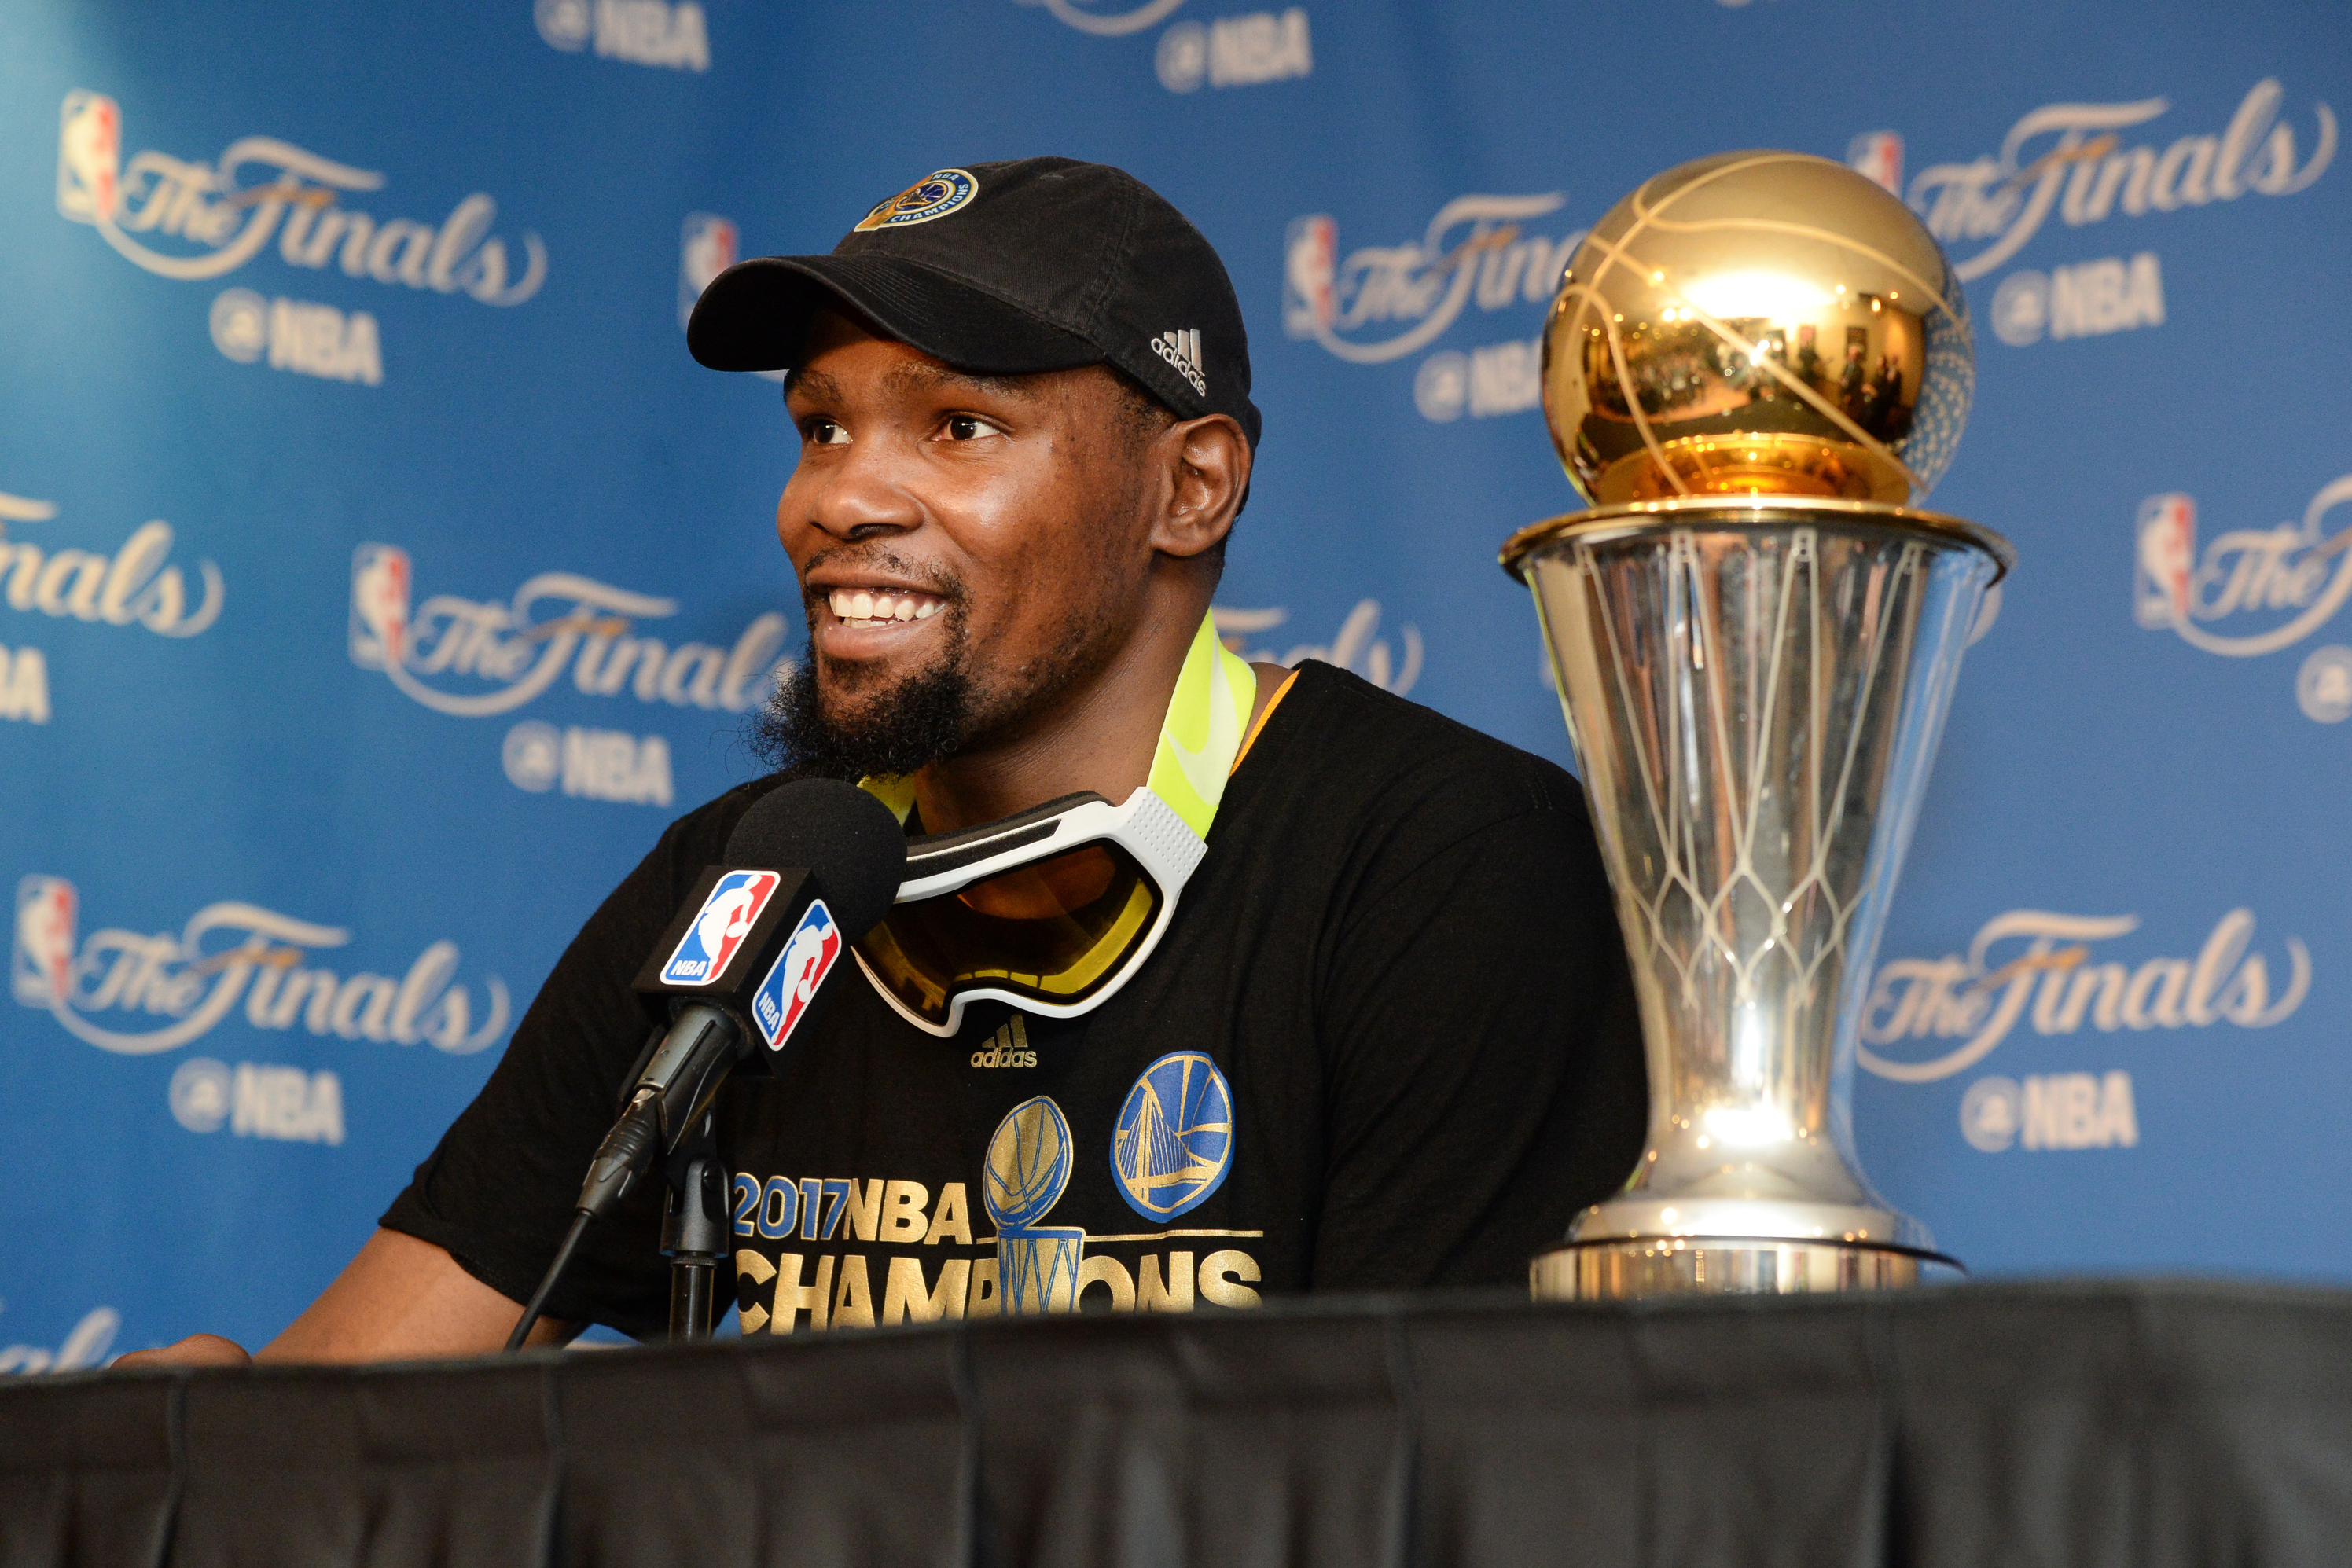 Warriors win NBA title, Kevin Durant claims Finals MVP